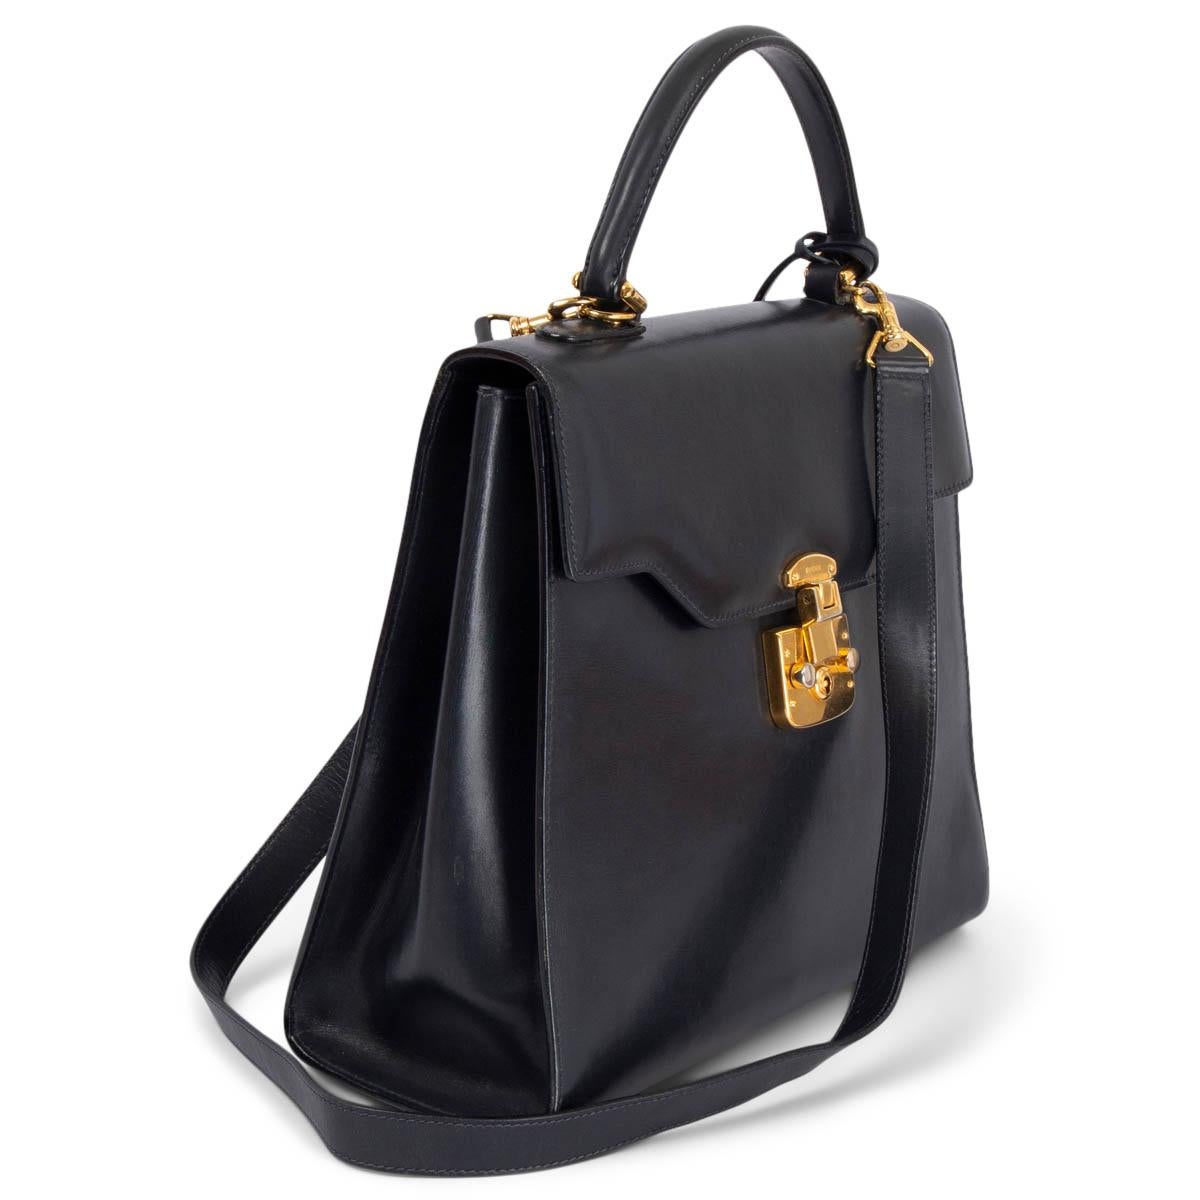 100% authentic Gucci Vintage Lady Lock top handle bag in navy blue featuring gold-tone hardware. Opens with a push-lock and a flap to a red lined leather interior with a zipper pocket against the back and two open pockets. Comes with a detachable